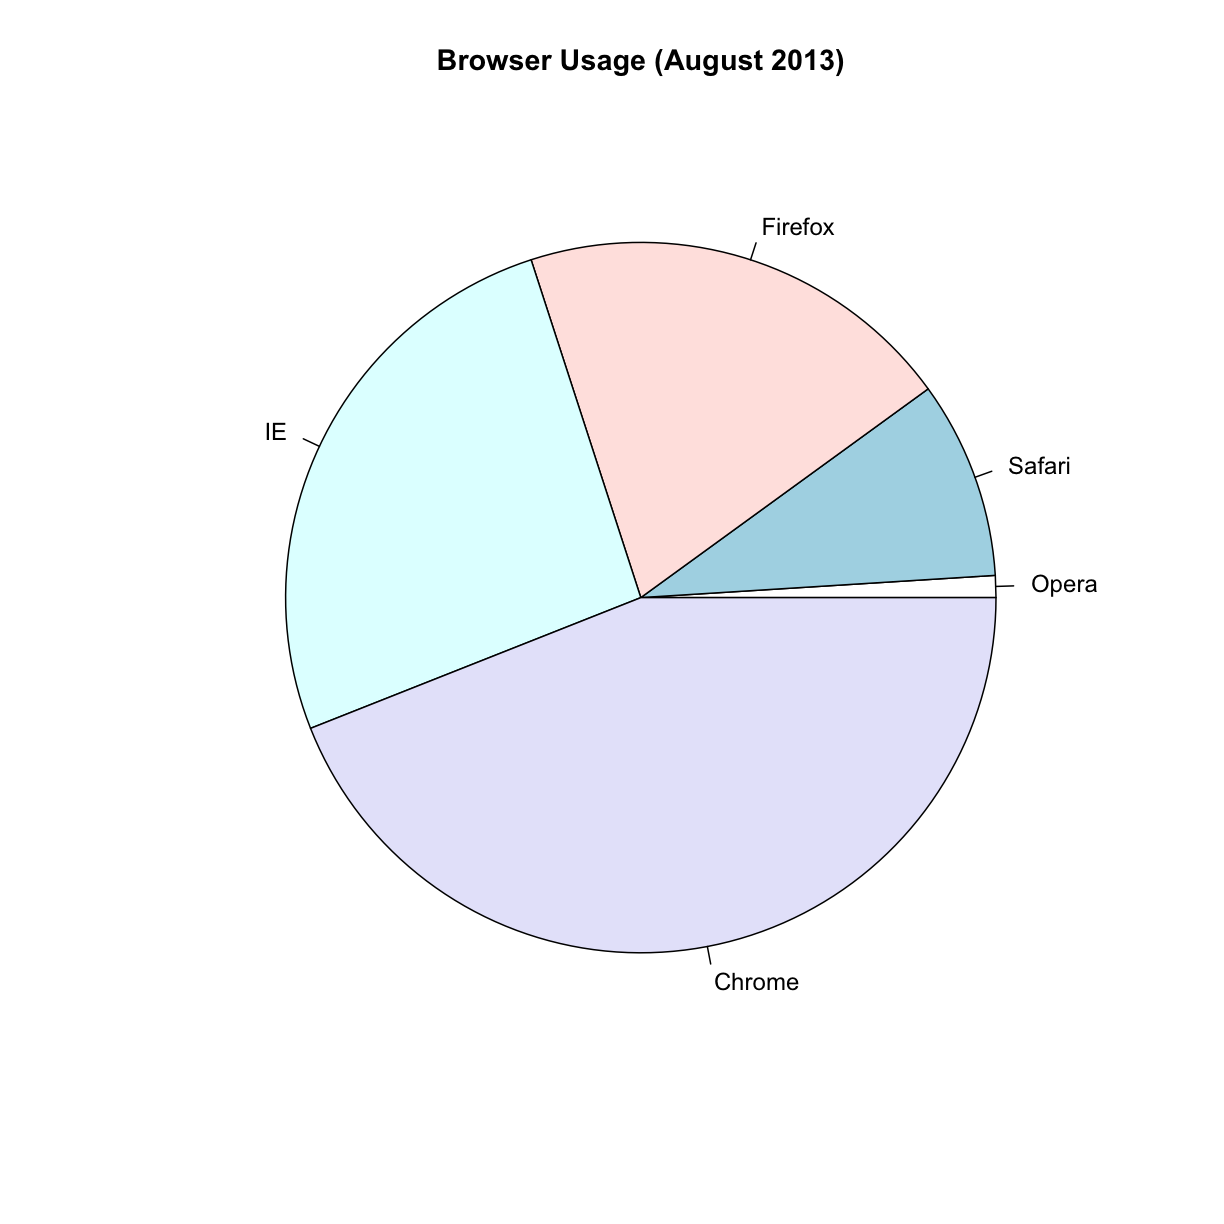 Pie chart of browser usage.